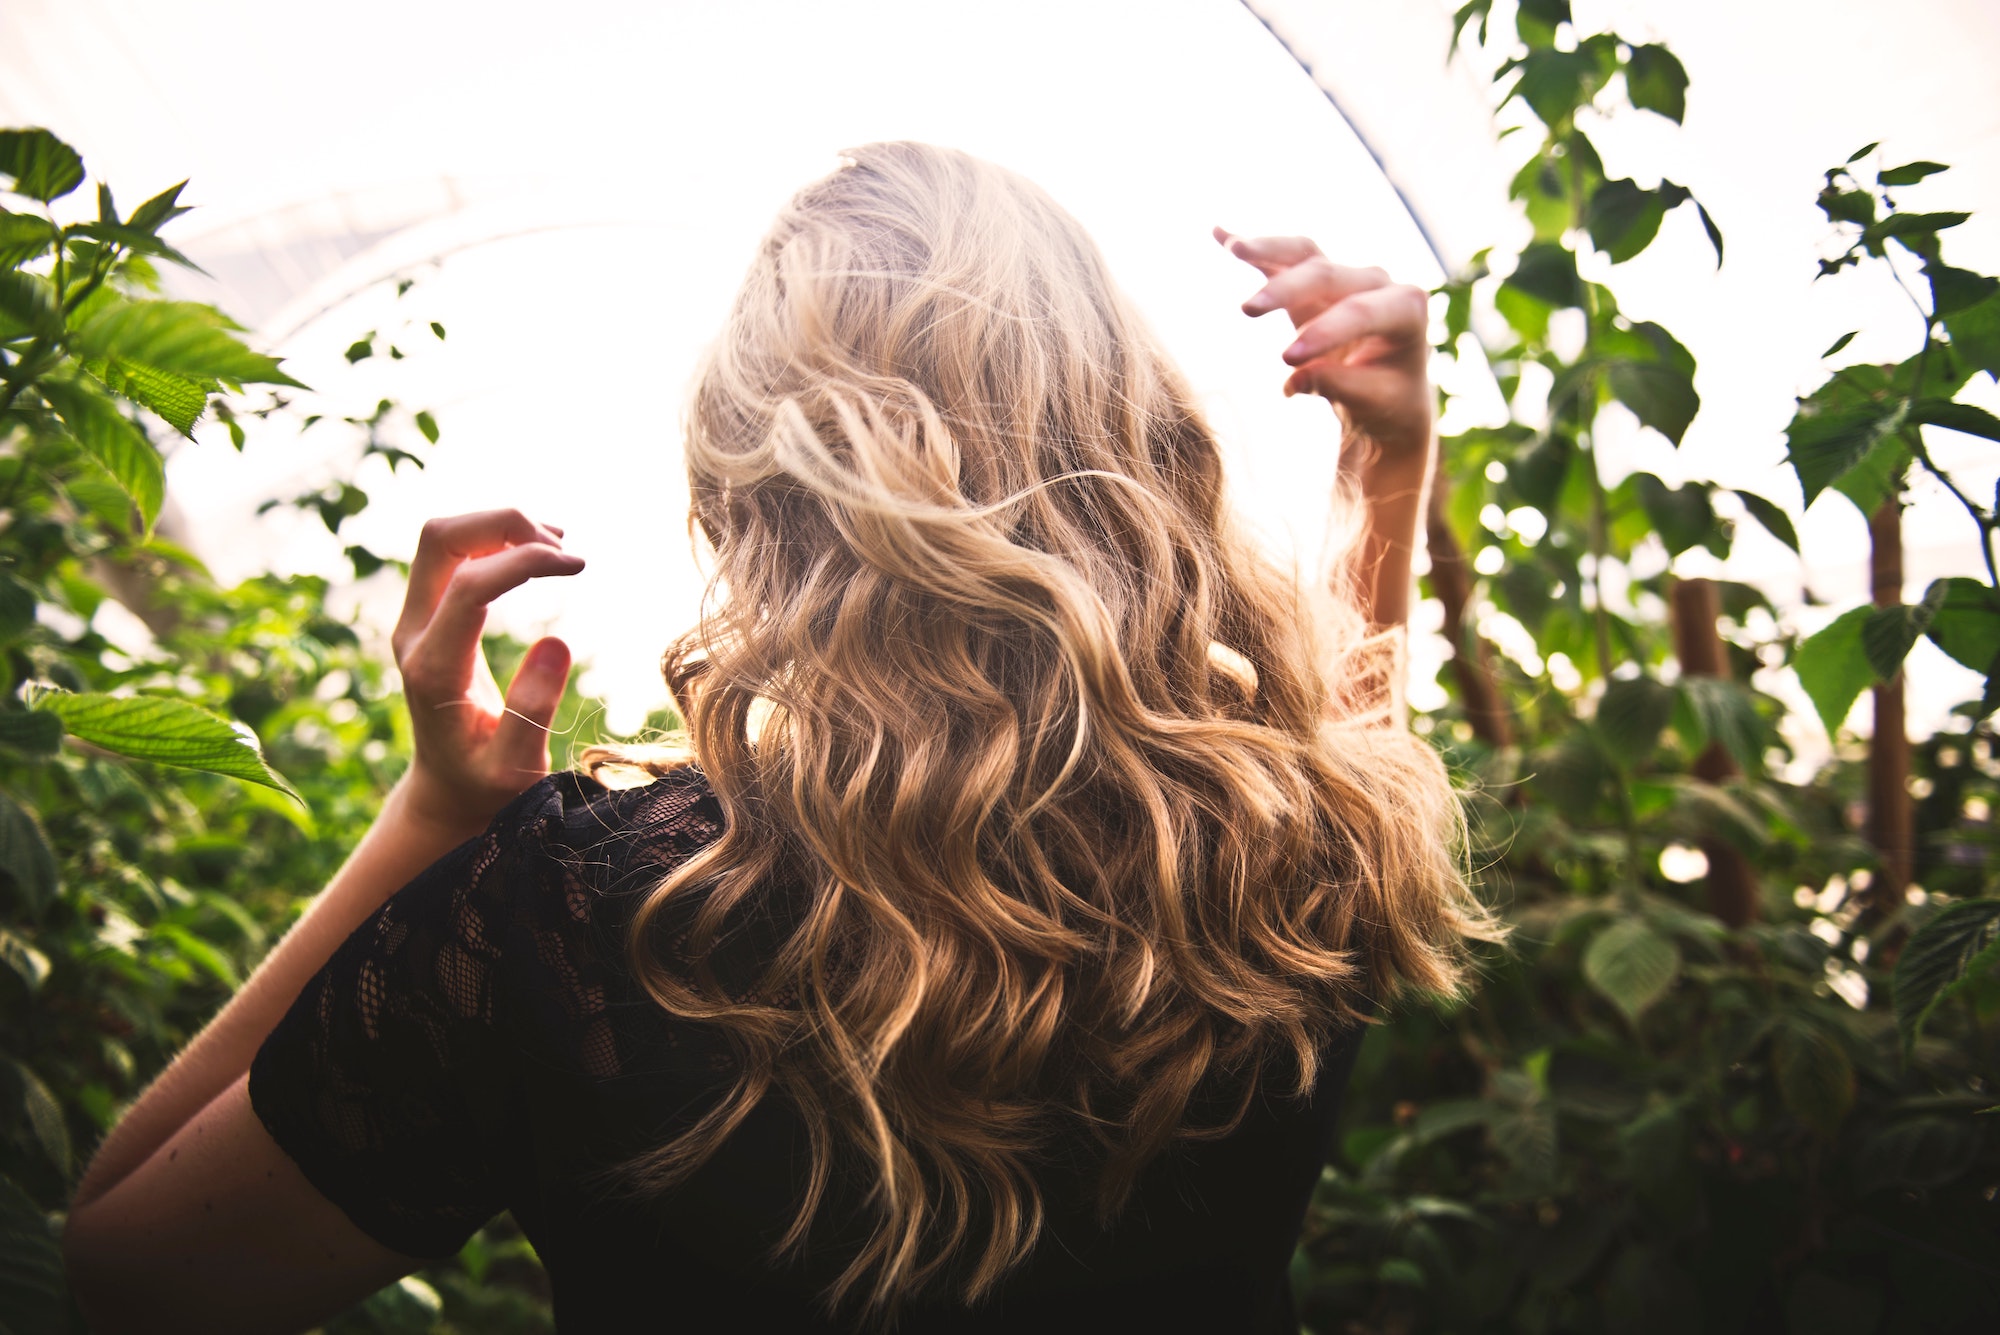 How to get your hair and skin summer-ready | Beauty Tips | Elle Blonde Luxury Lifestyle Destination Blog